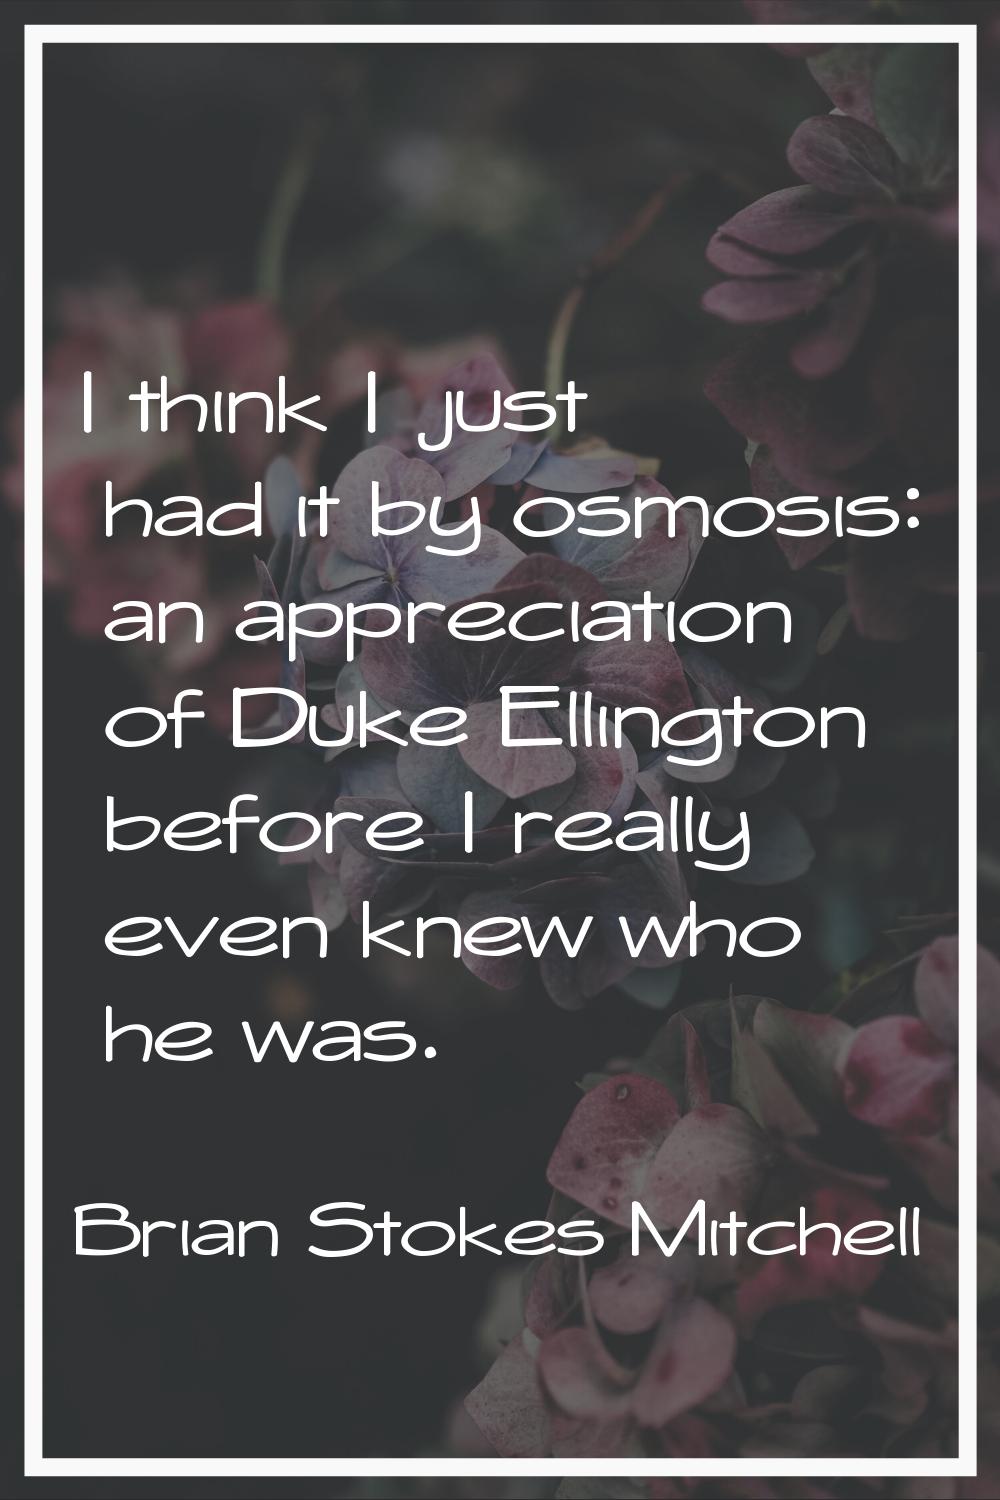 I think I just had it by osmosis: an appreciation of Duke Ellington before I really even knew who h